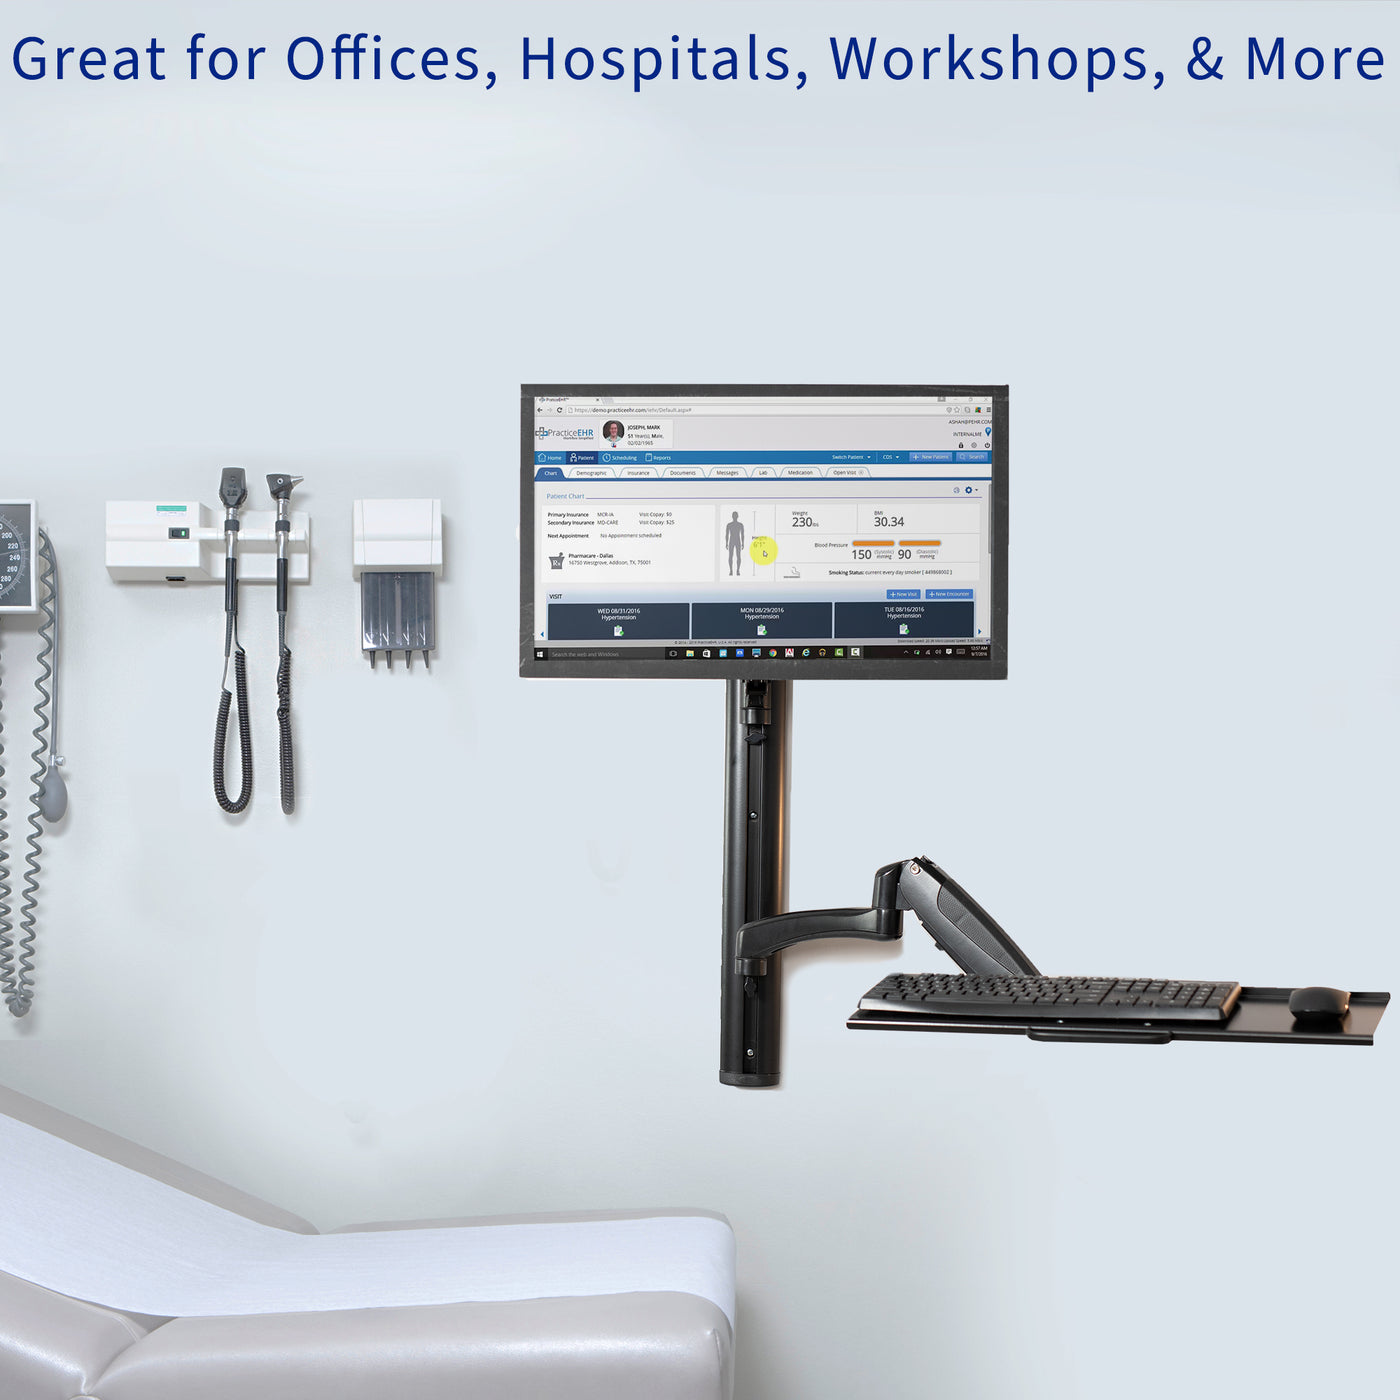 This monitor mount is great for offices, hospitals, workshops, and more.